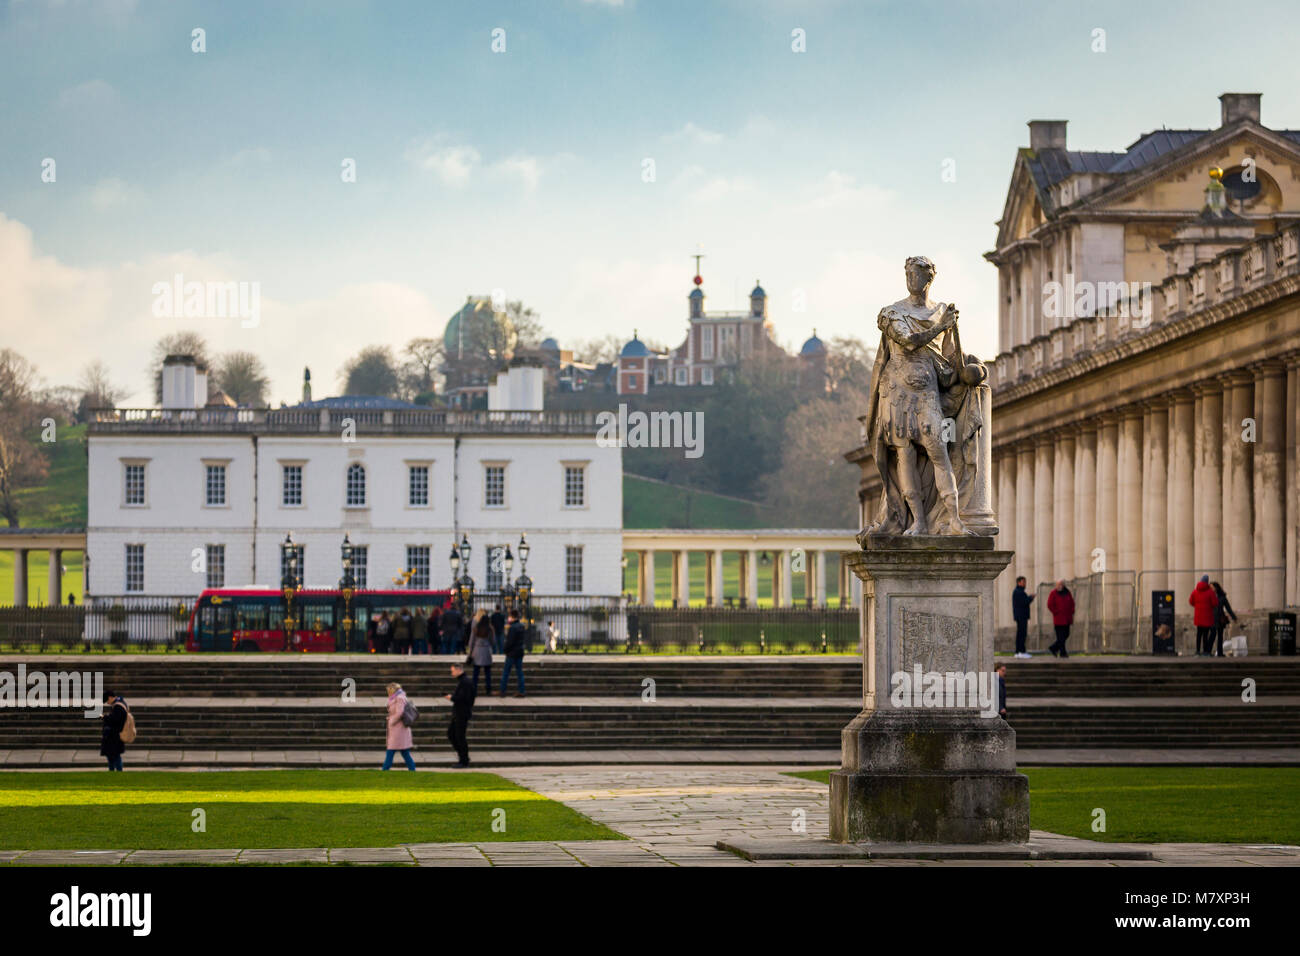 LONDON, UK – JAN 2018:  The Queen's House in Greenwich with Royal Observatory in background and students of Greenwich University walking past  statue  Stock Photo